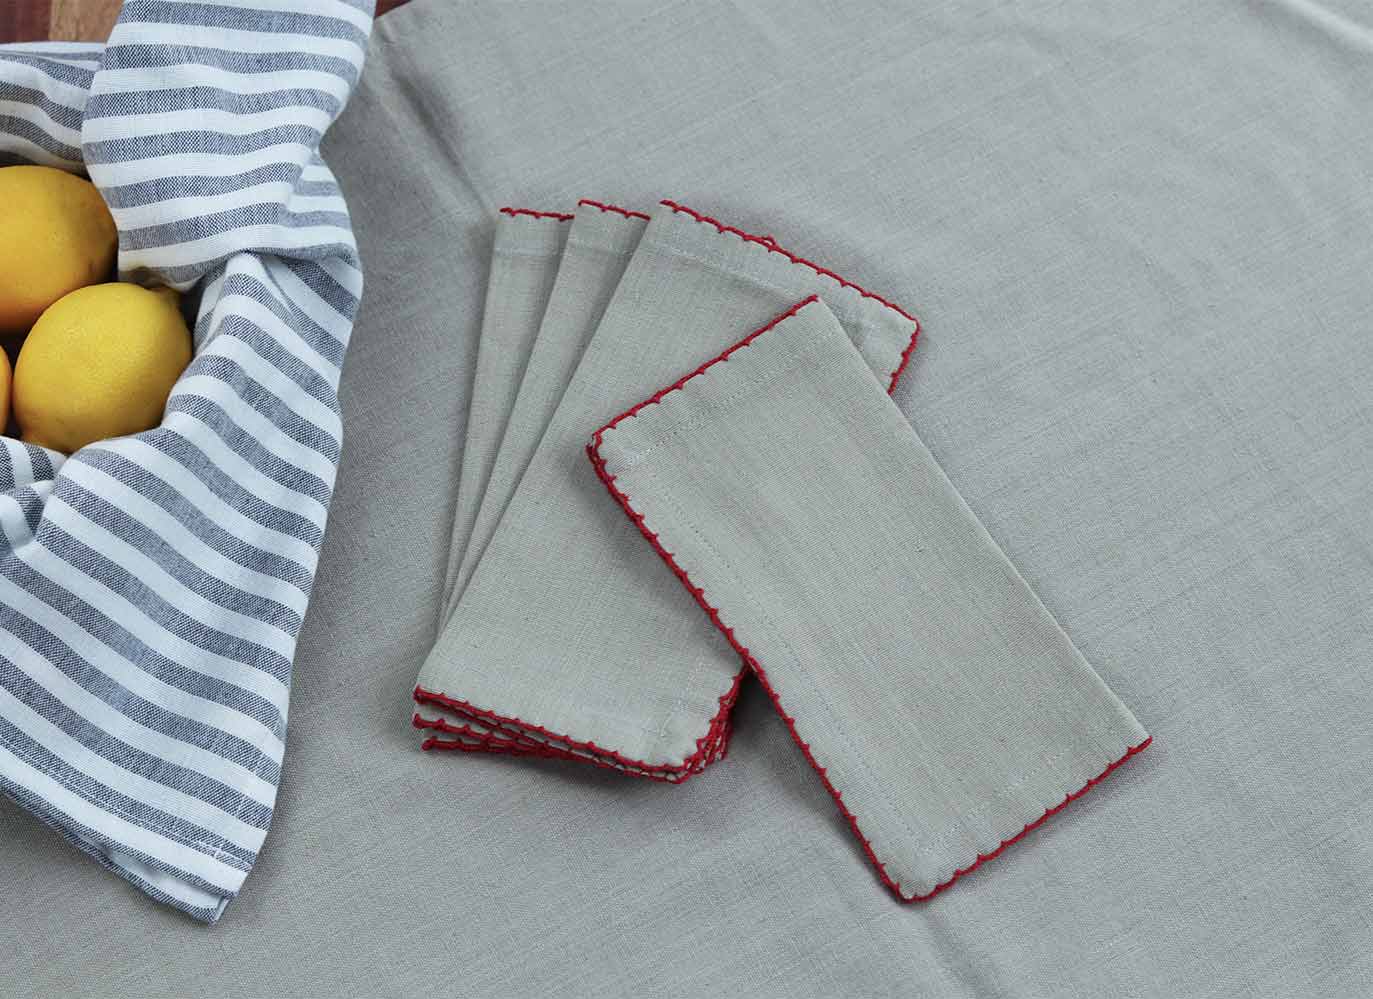 Buy crafted table linen, rugs, and quilts